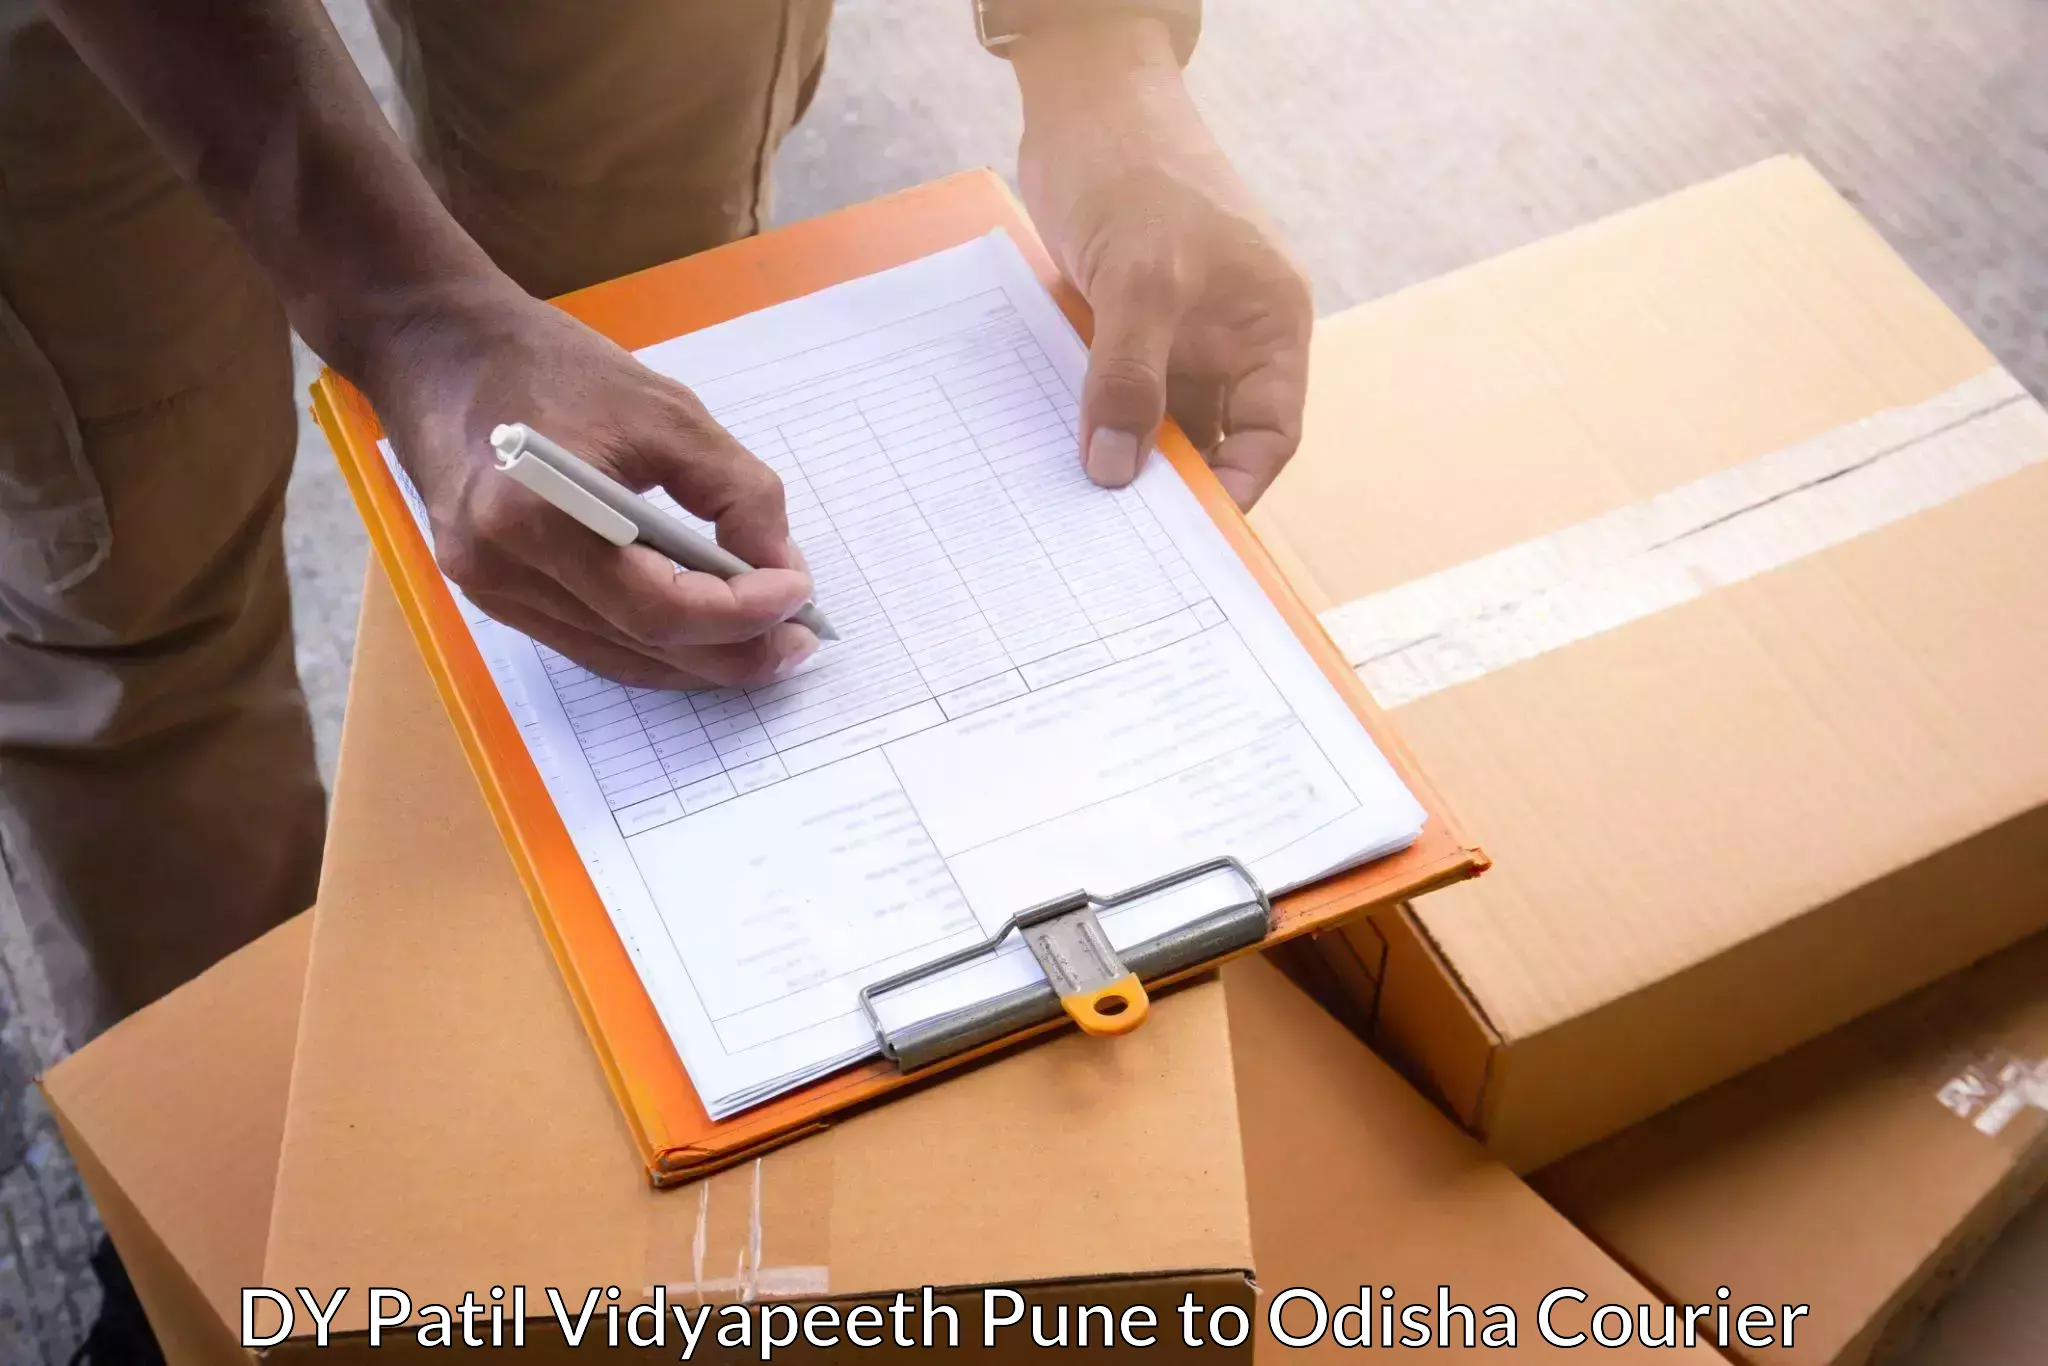 Express package services DY Patil Vidyapeeth Pune to Tangi